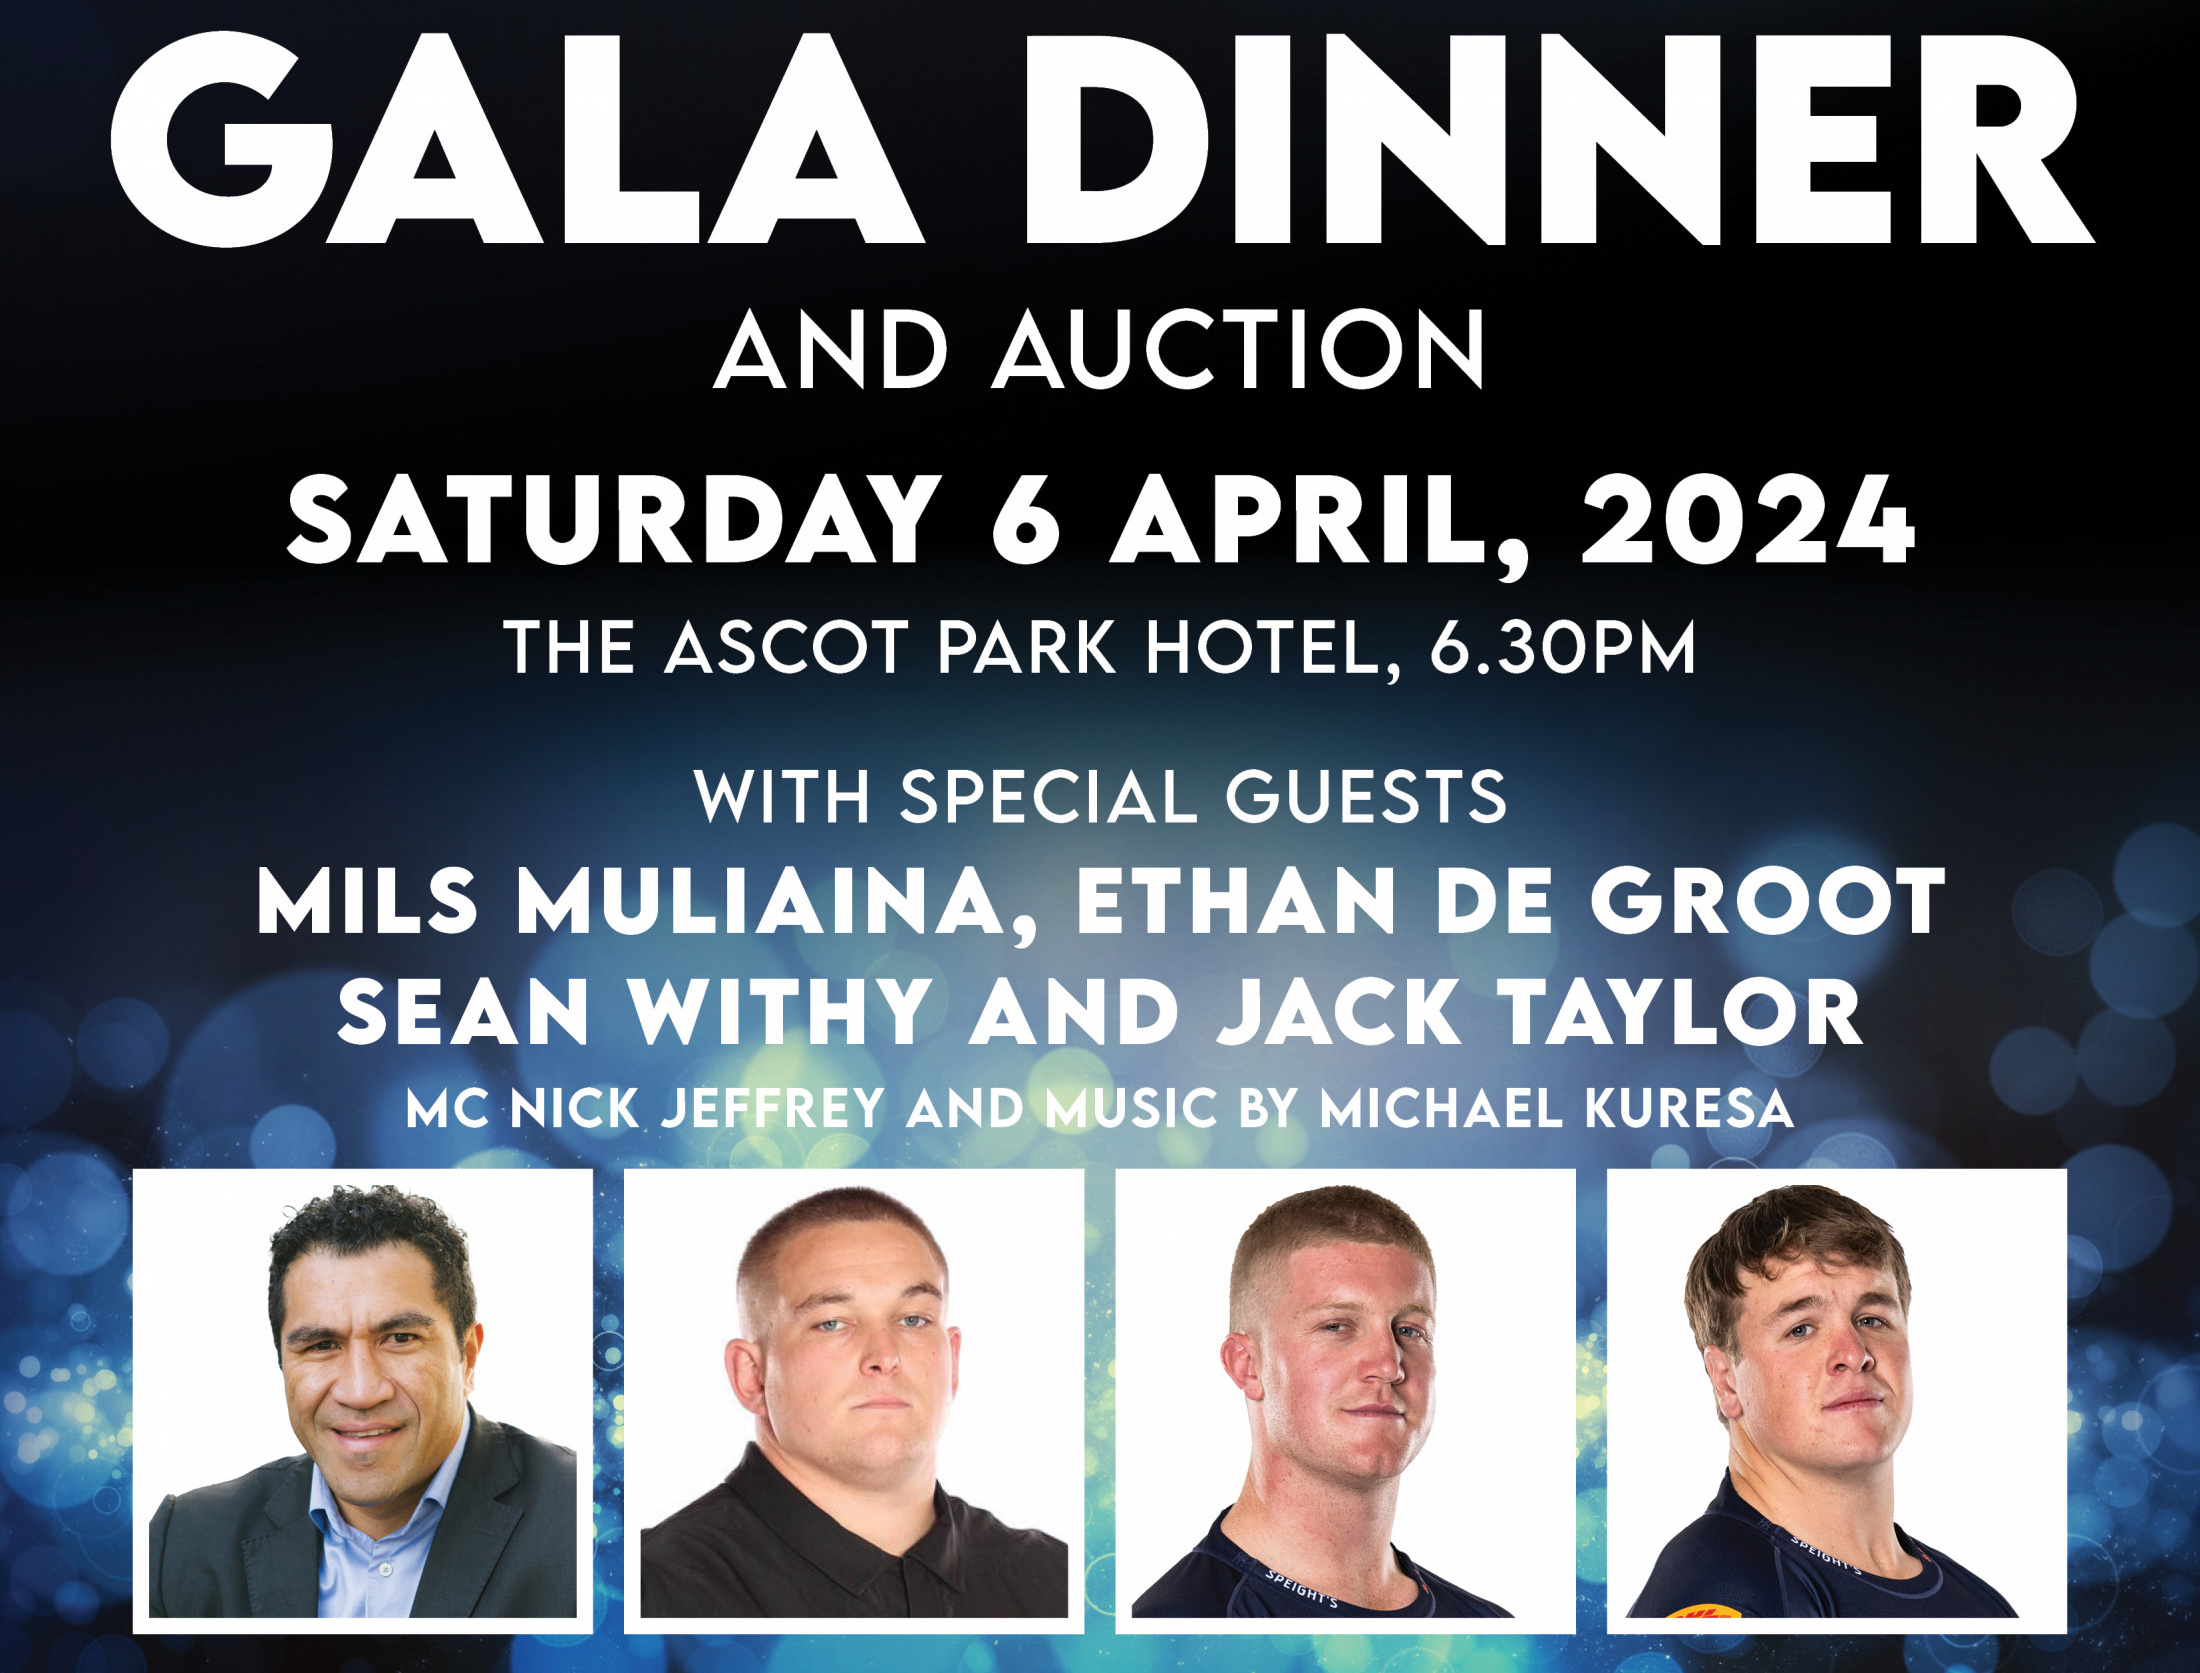 Gala Dinner and Auction 6 April - Fundraiser for First XV